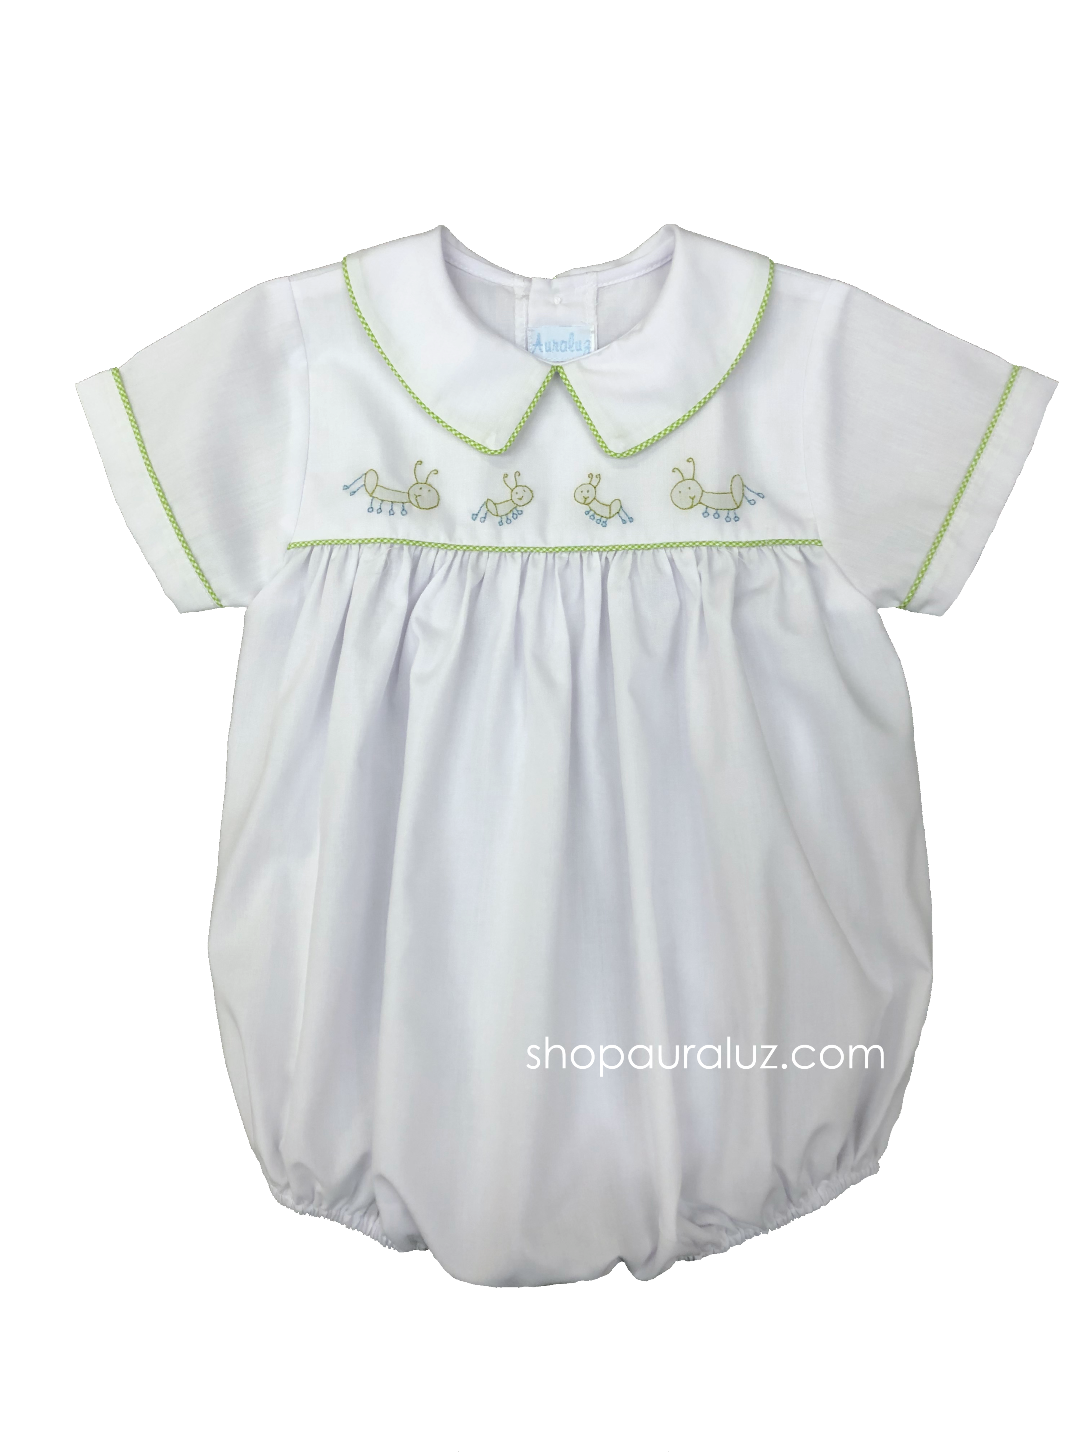 Auraluz Boy Bubble..White with lime check trim, boy collar and embroidered grasshoppers